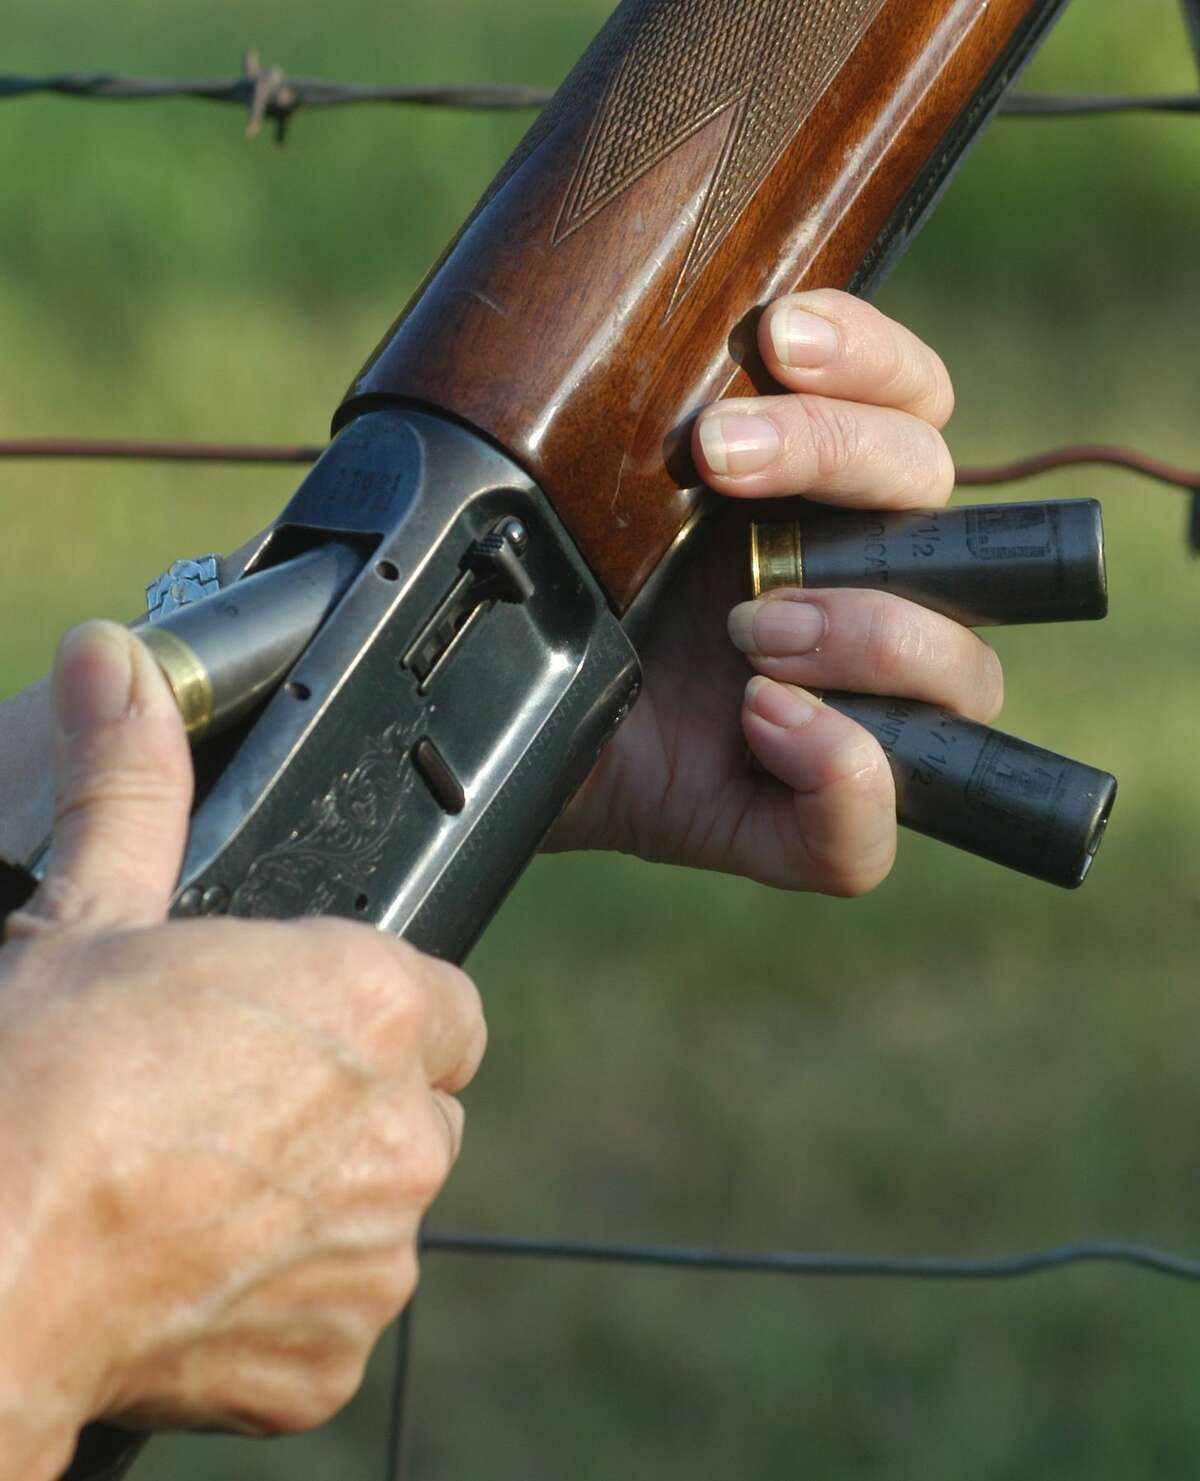 For migratory bird hunting, all shotguns must plugged to a three-shot capacity.